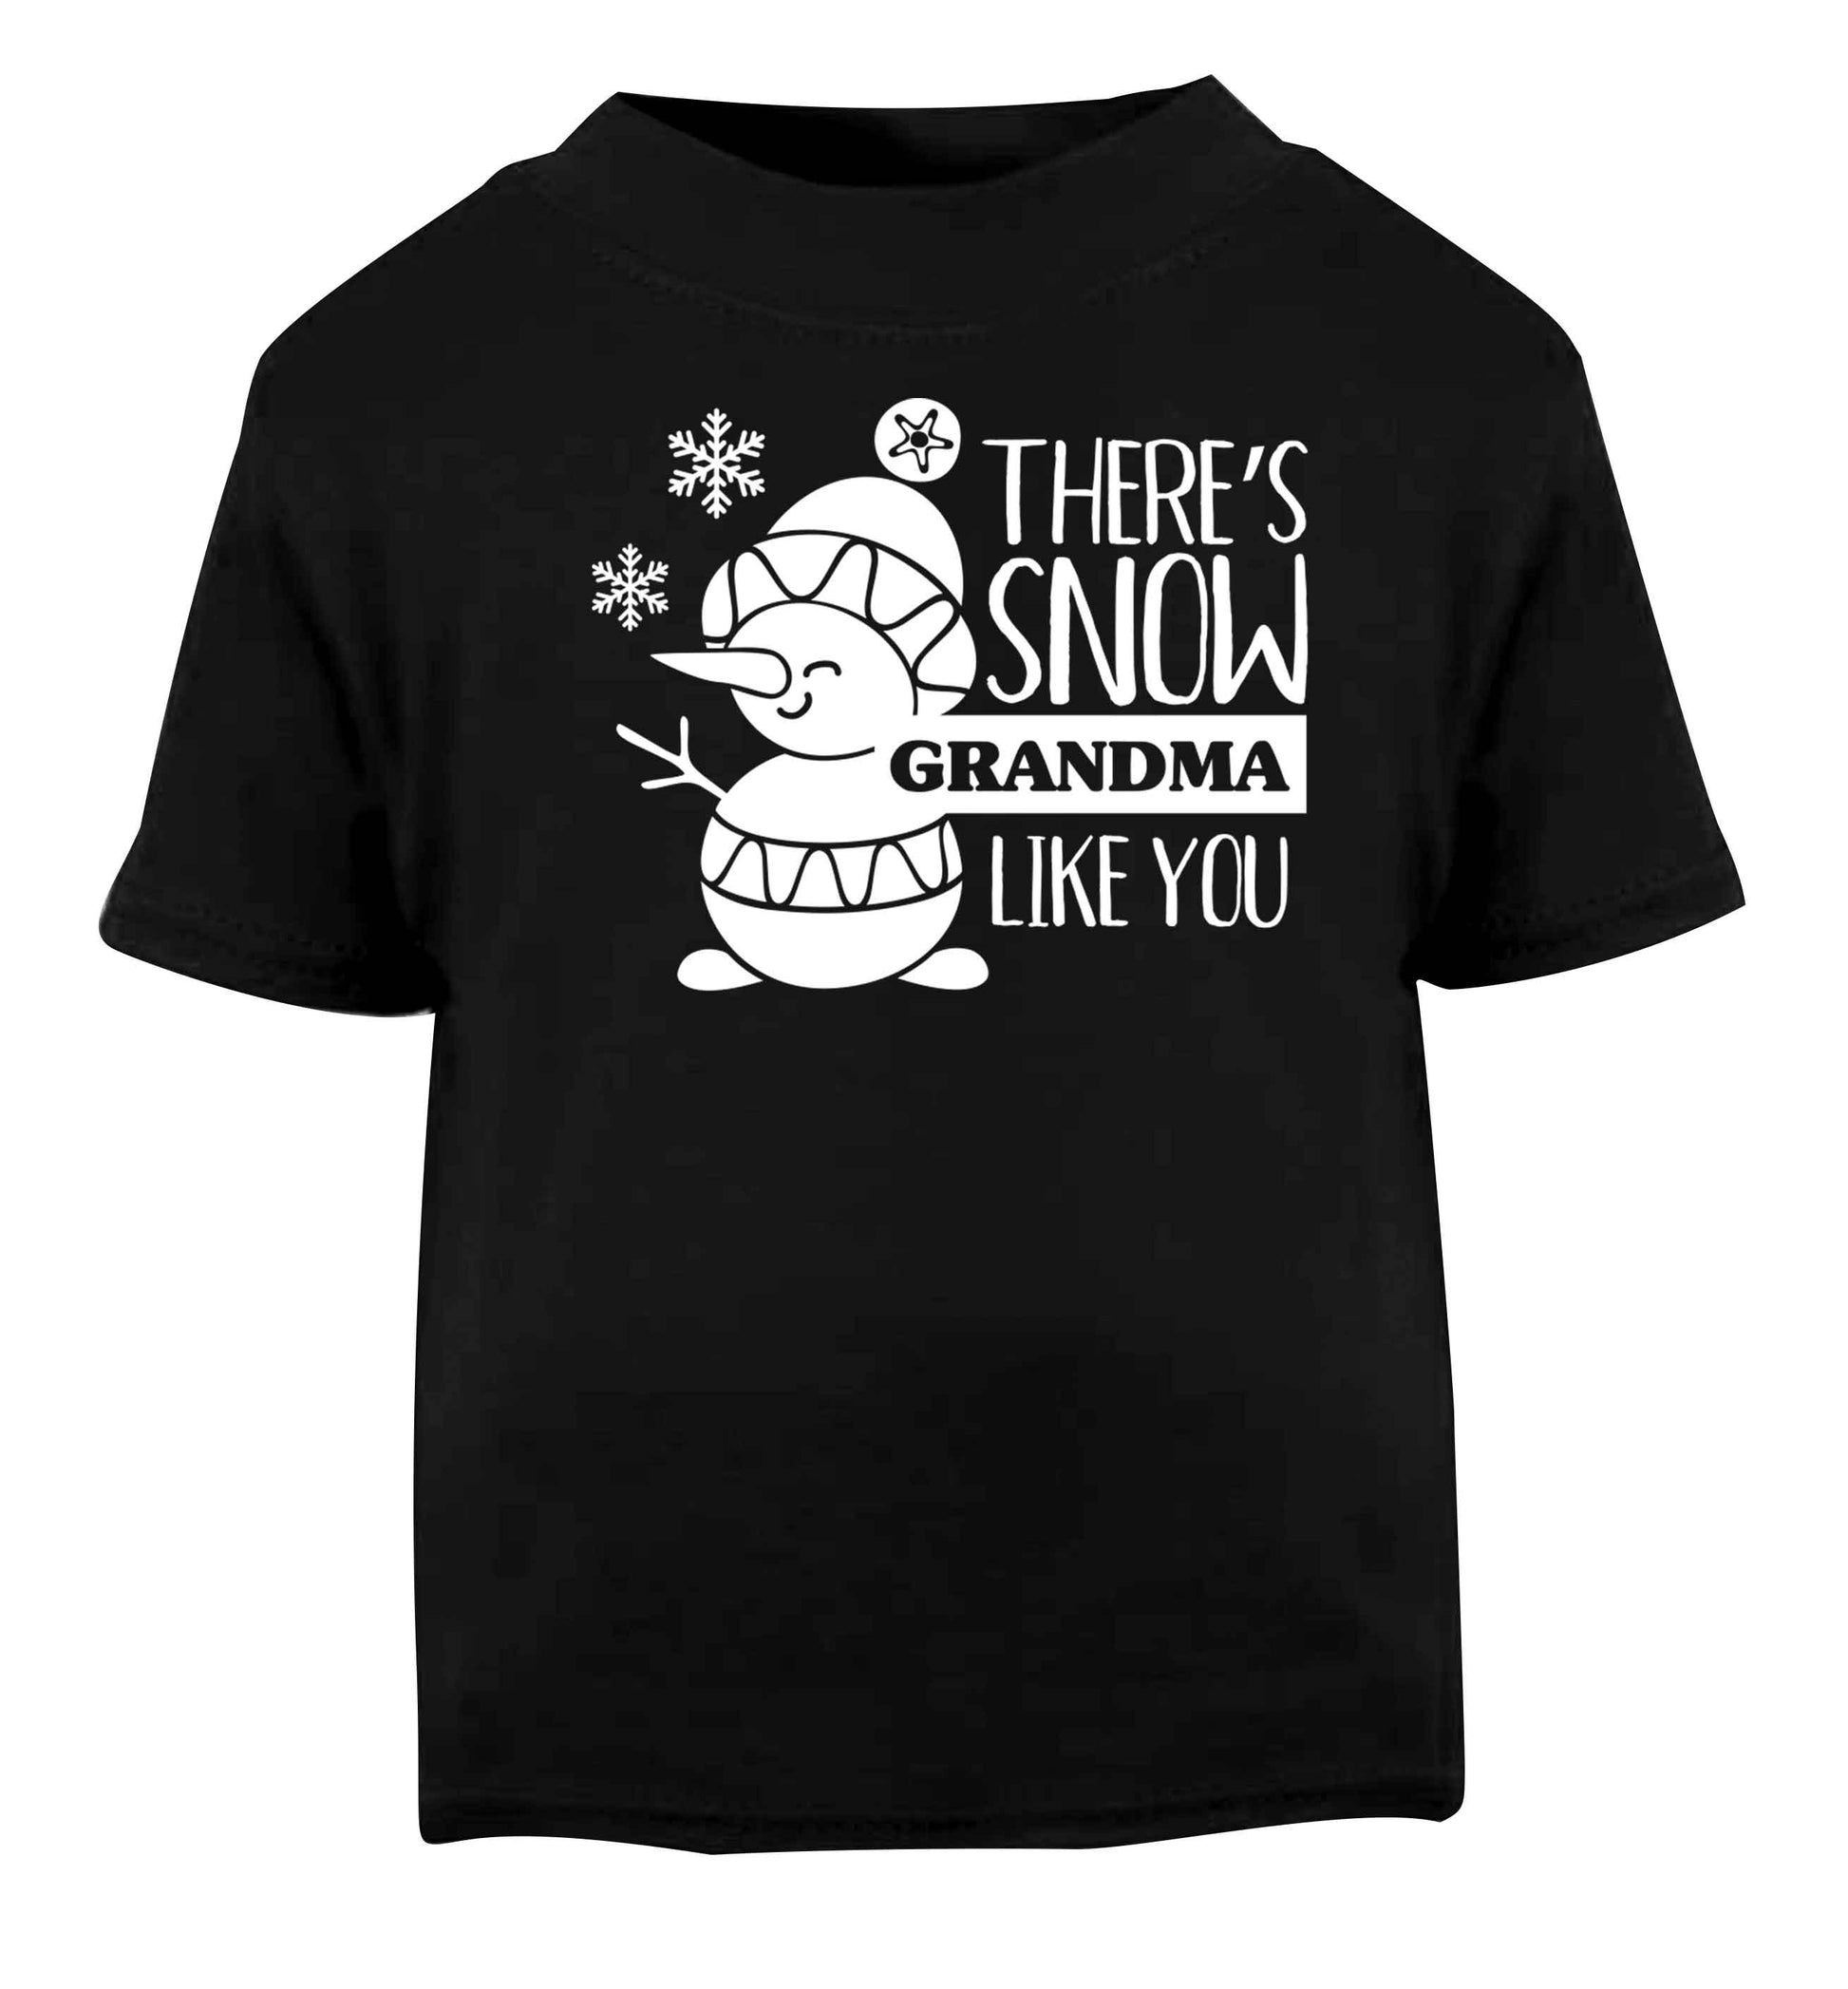 There's snow grandma like you Black baby toddler Tshirt 2 years